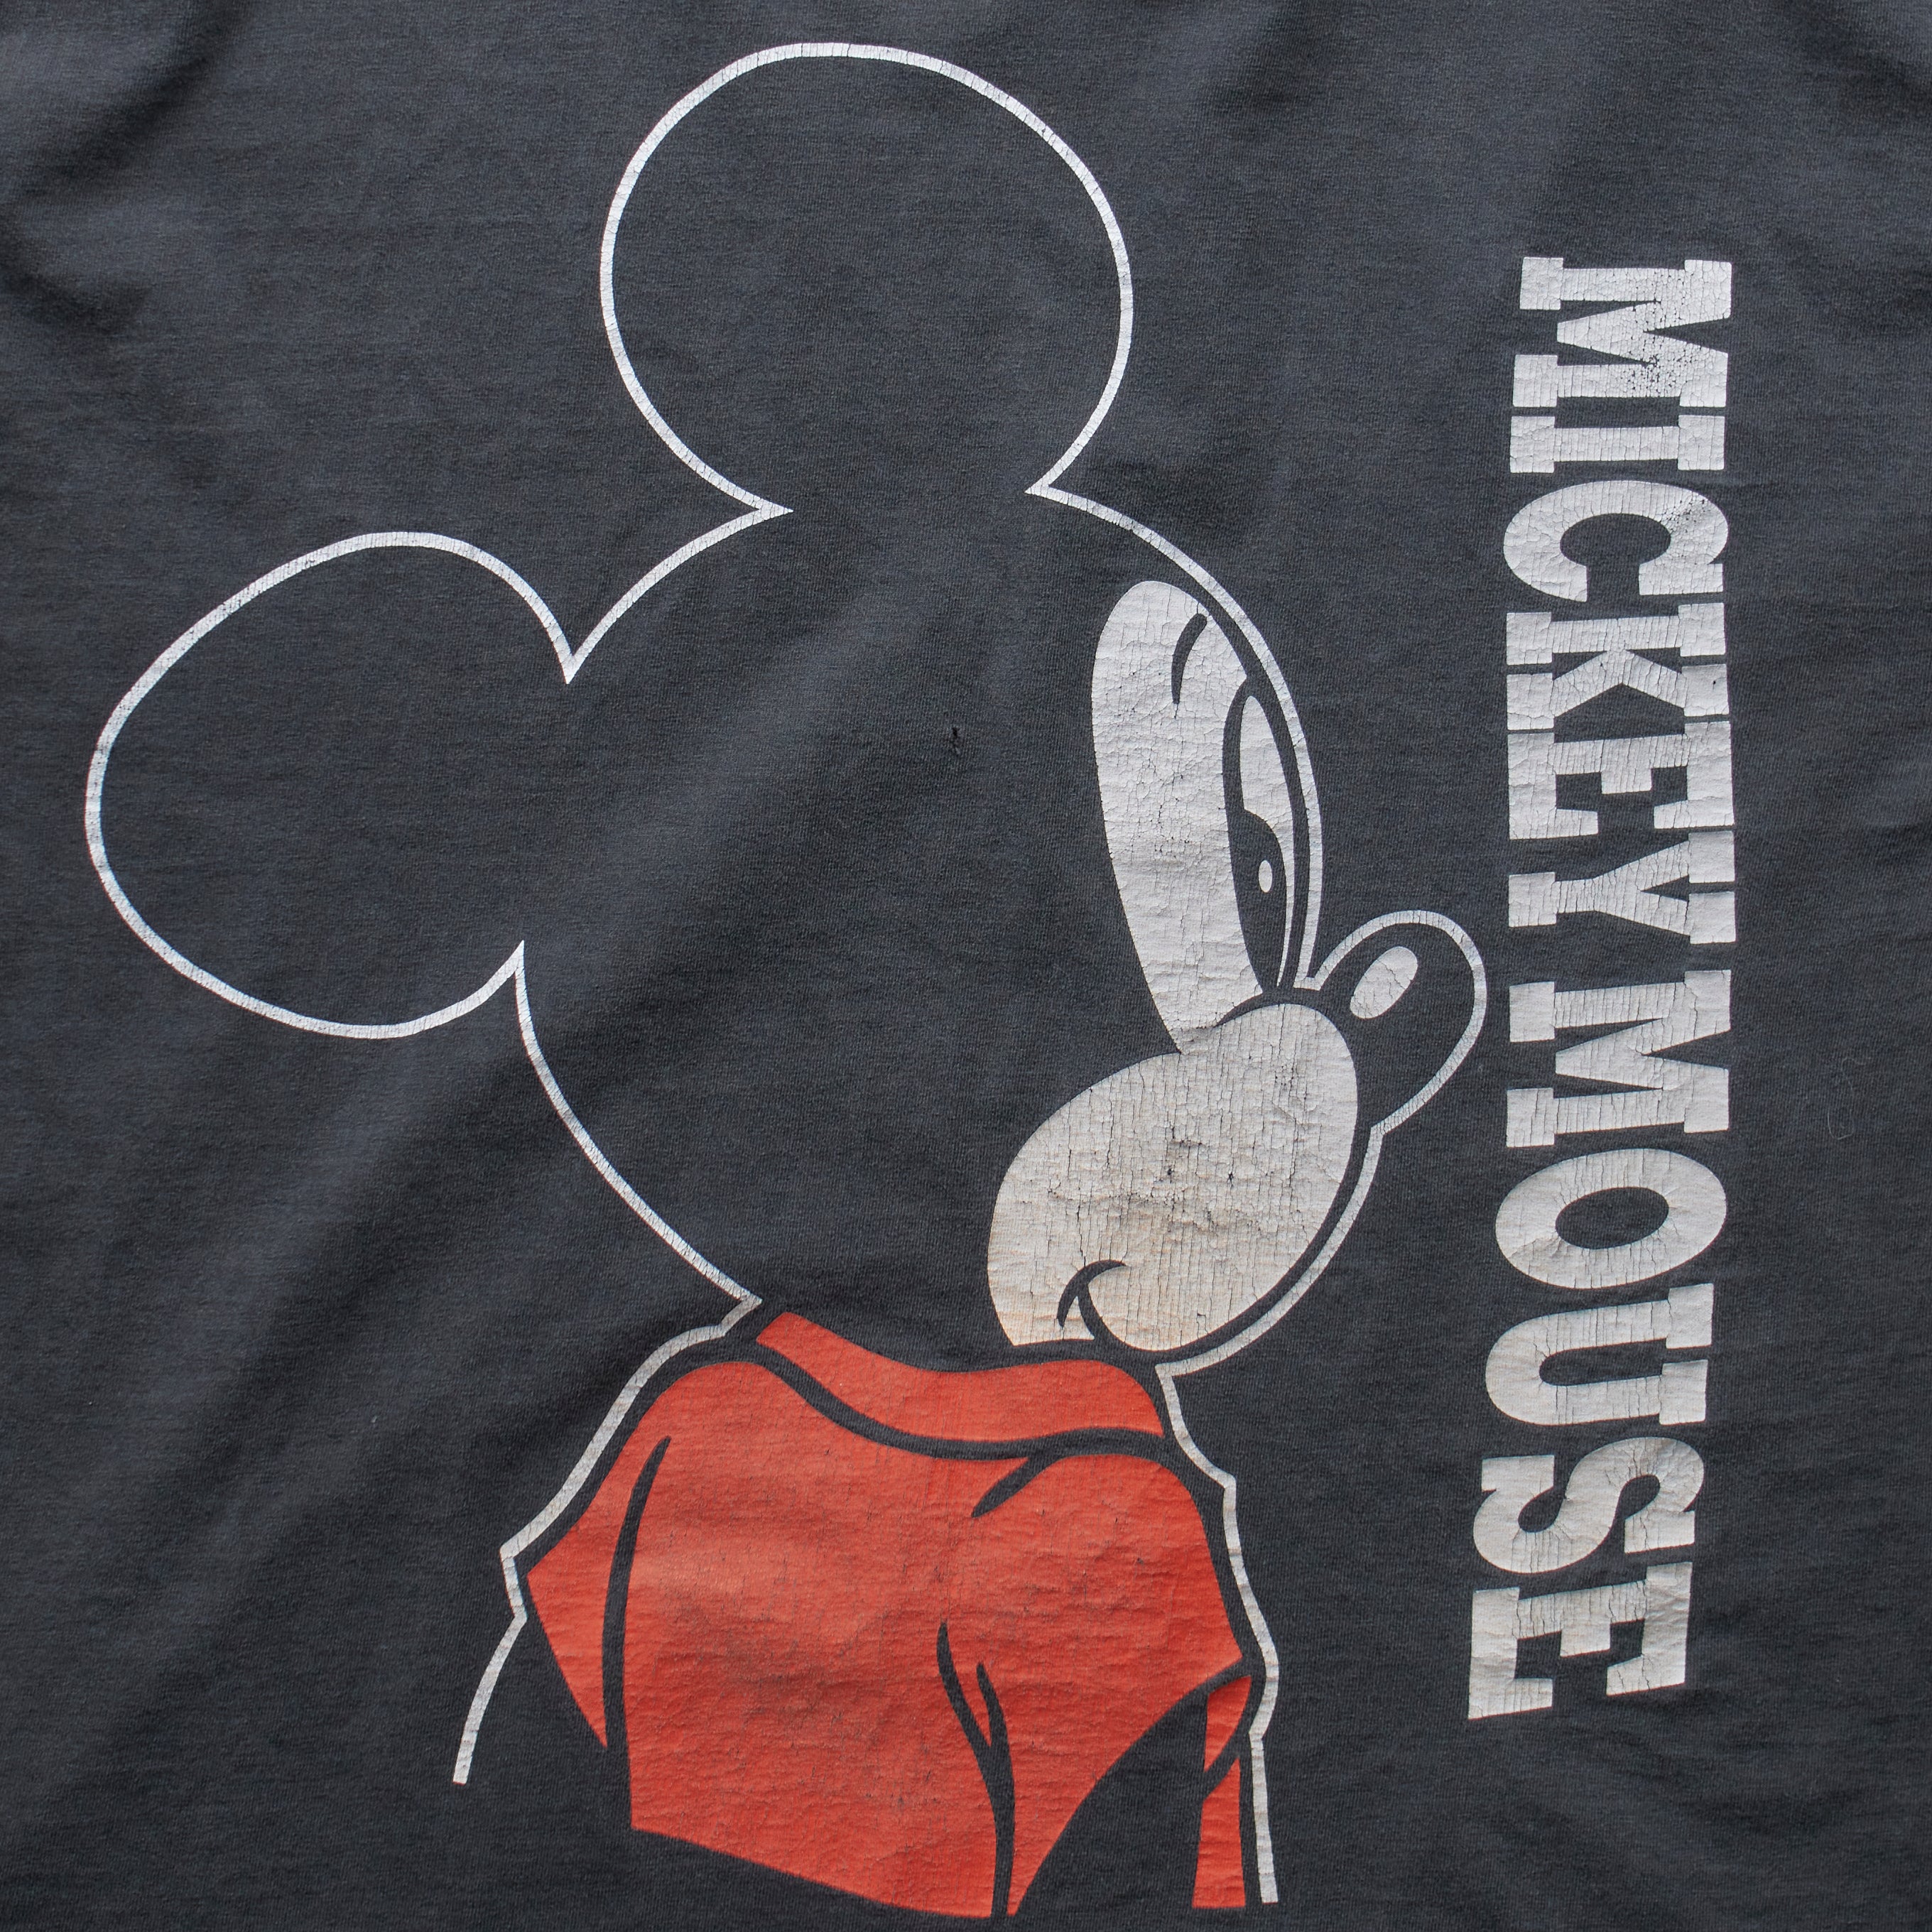 (M) 00s Mickey Mouse